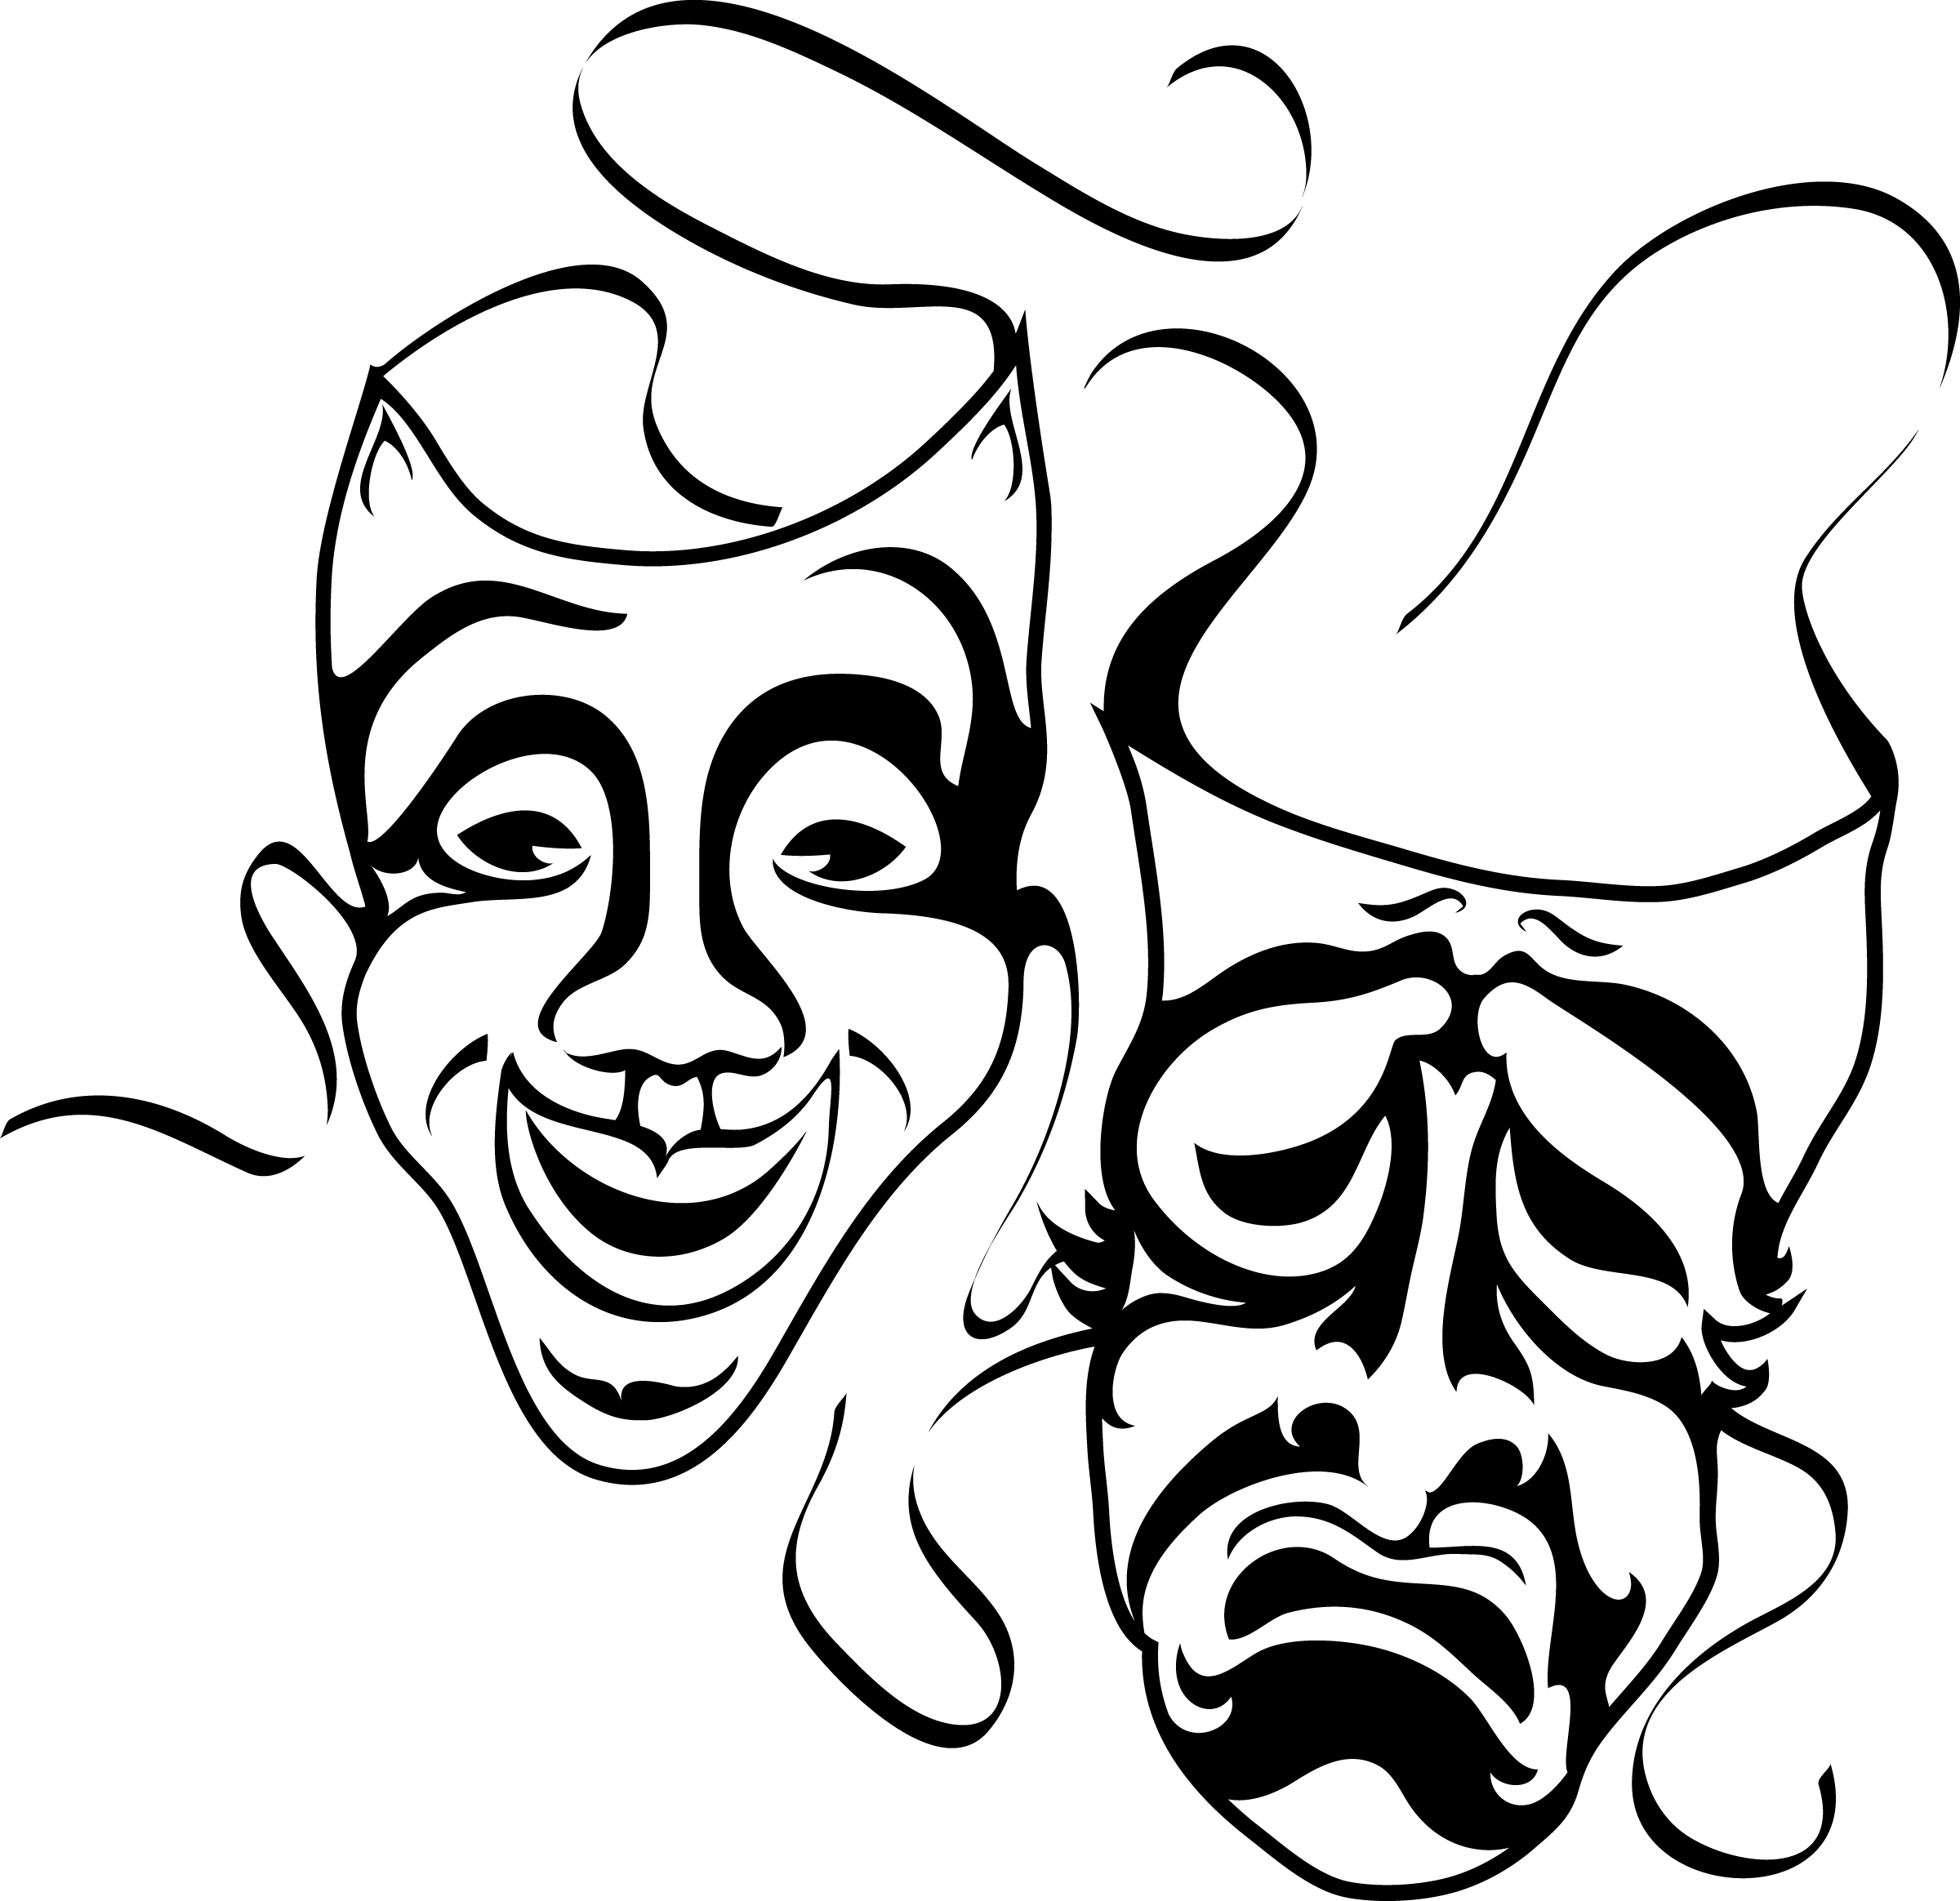 Theatre Masks Comedy Tragedy - ClipArt Best